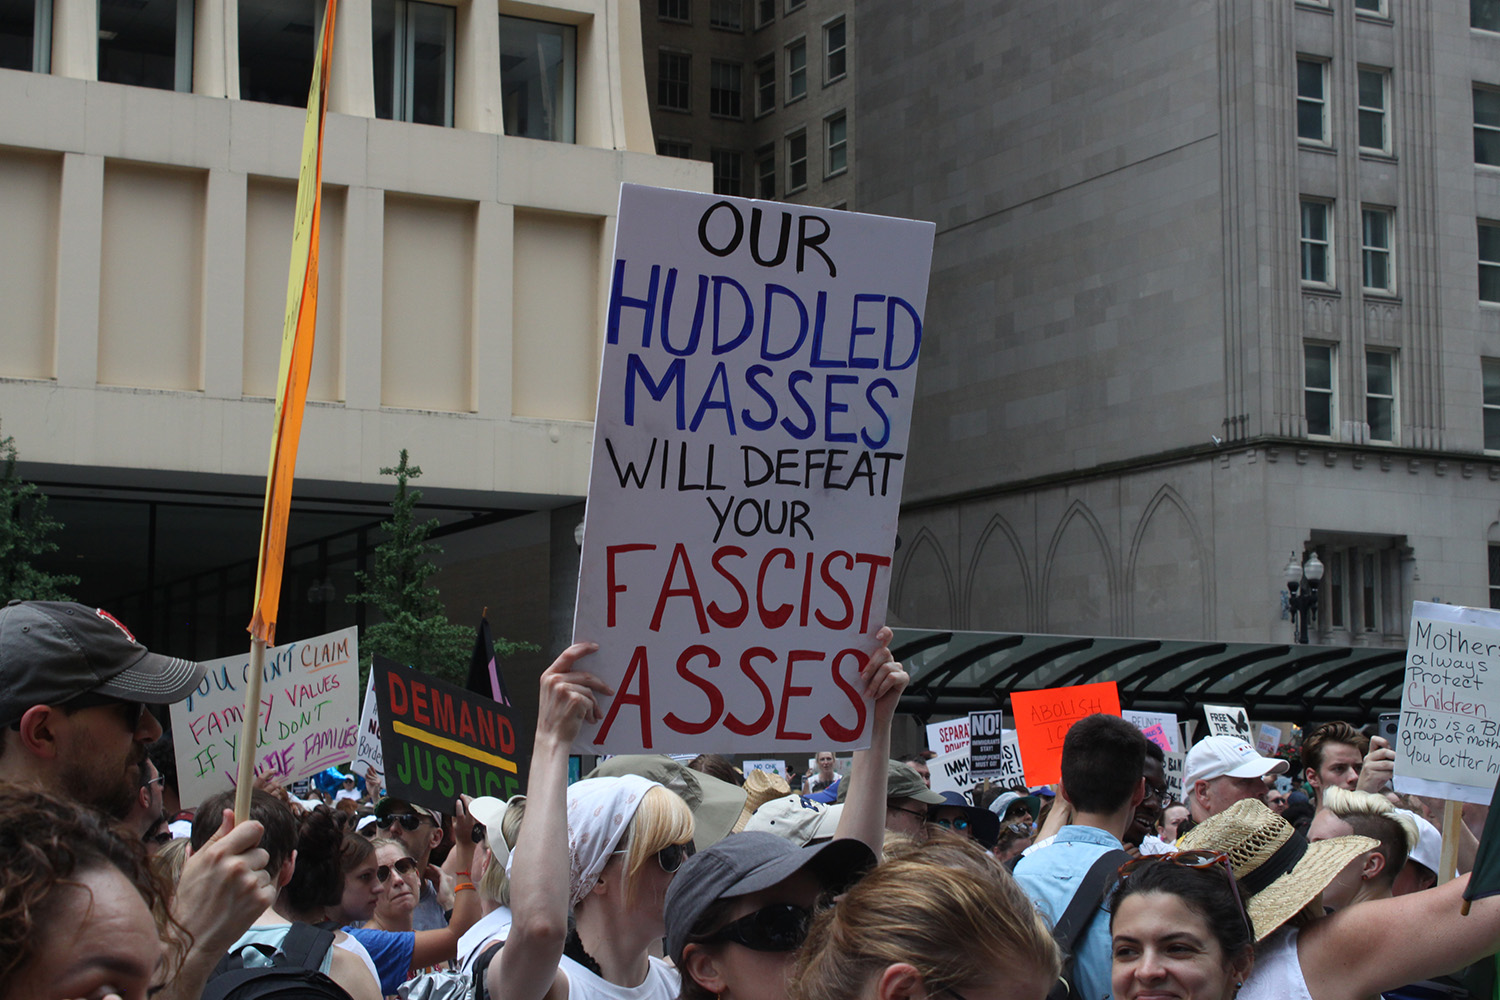 Signs calling the Trump administration "fascist" were ubiquitous at a protest against its immigration policies in Chicago on June 30, 2018. Will Racke/TheDCNF